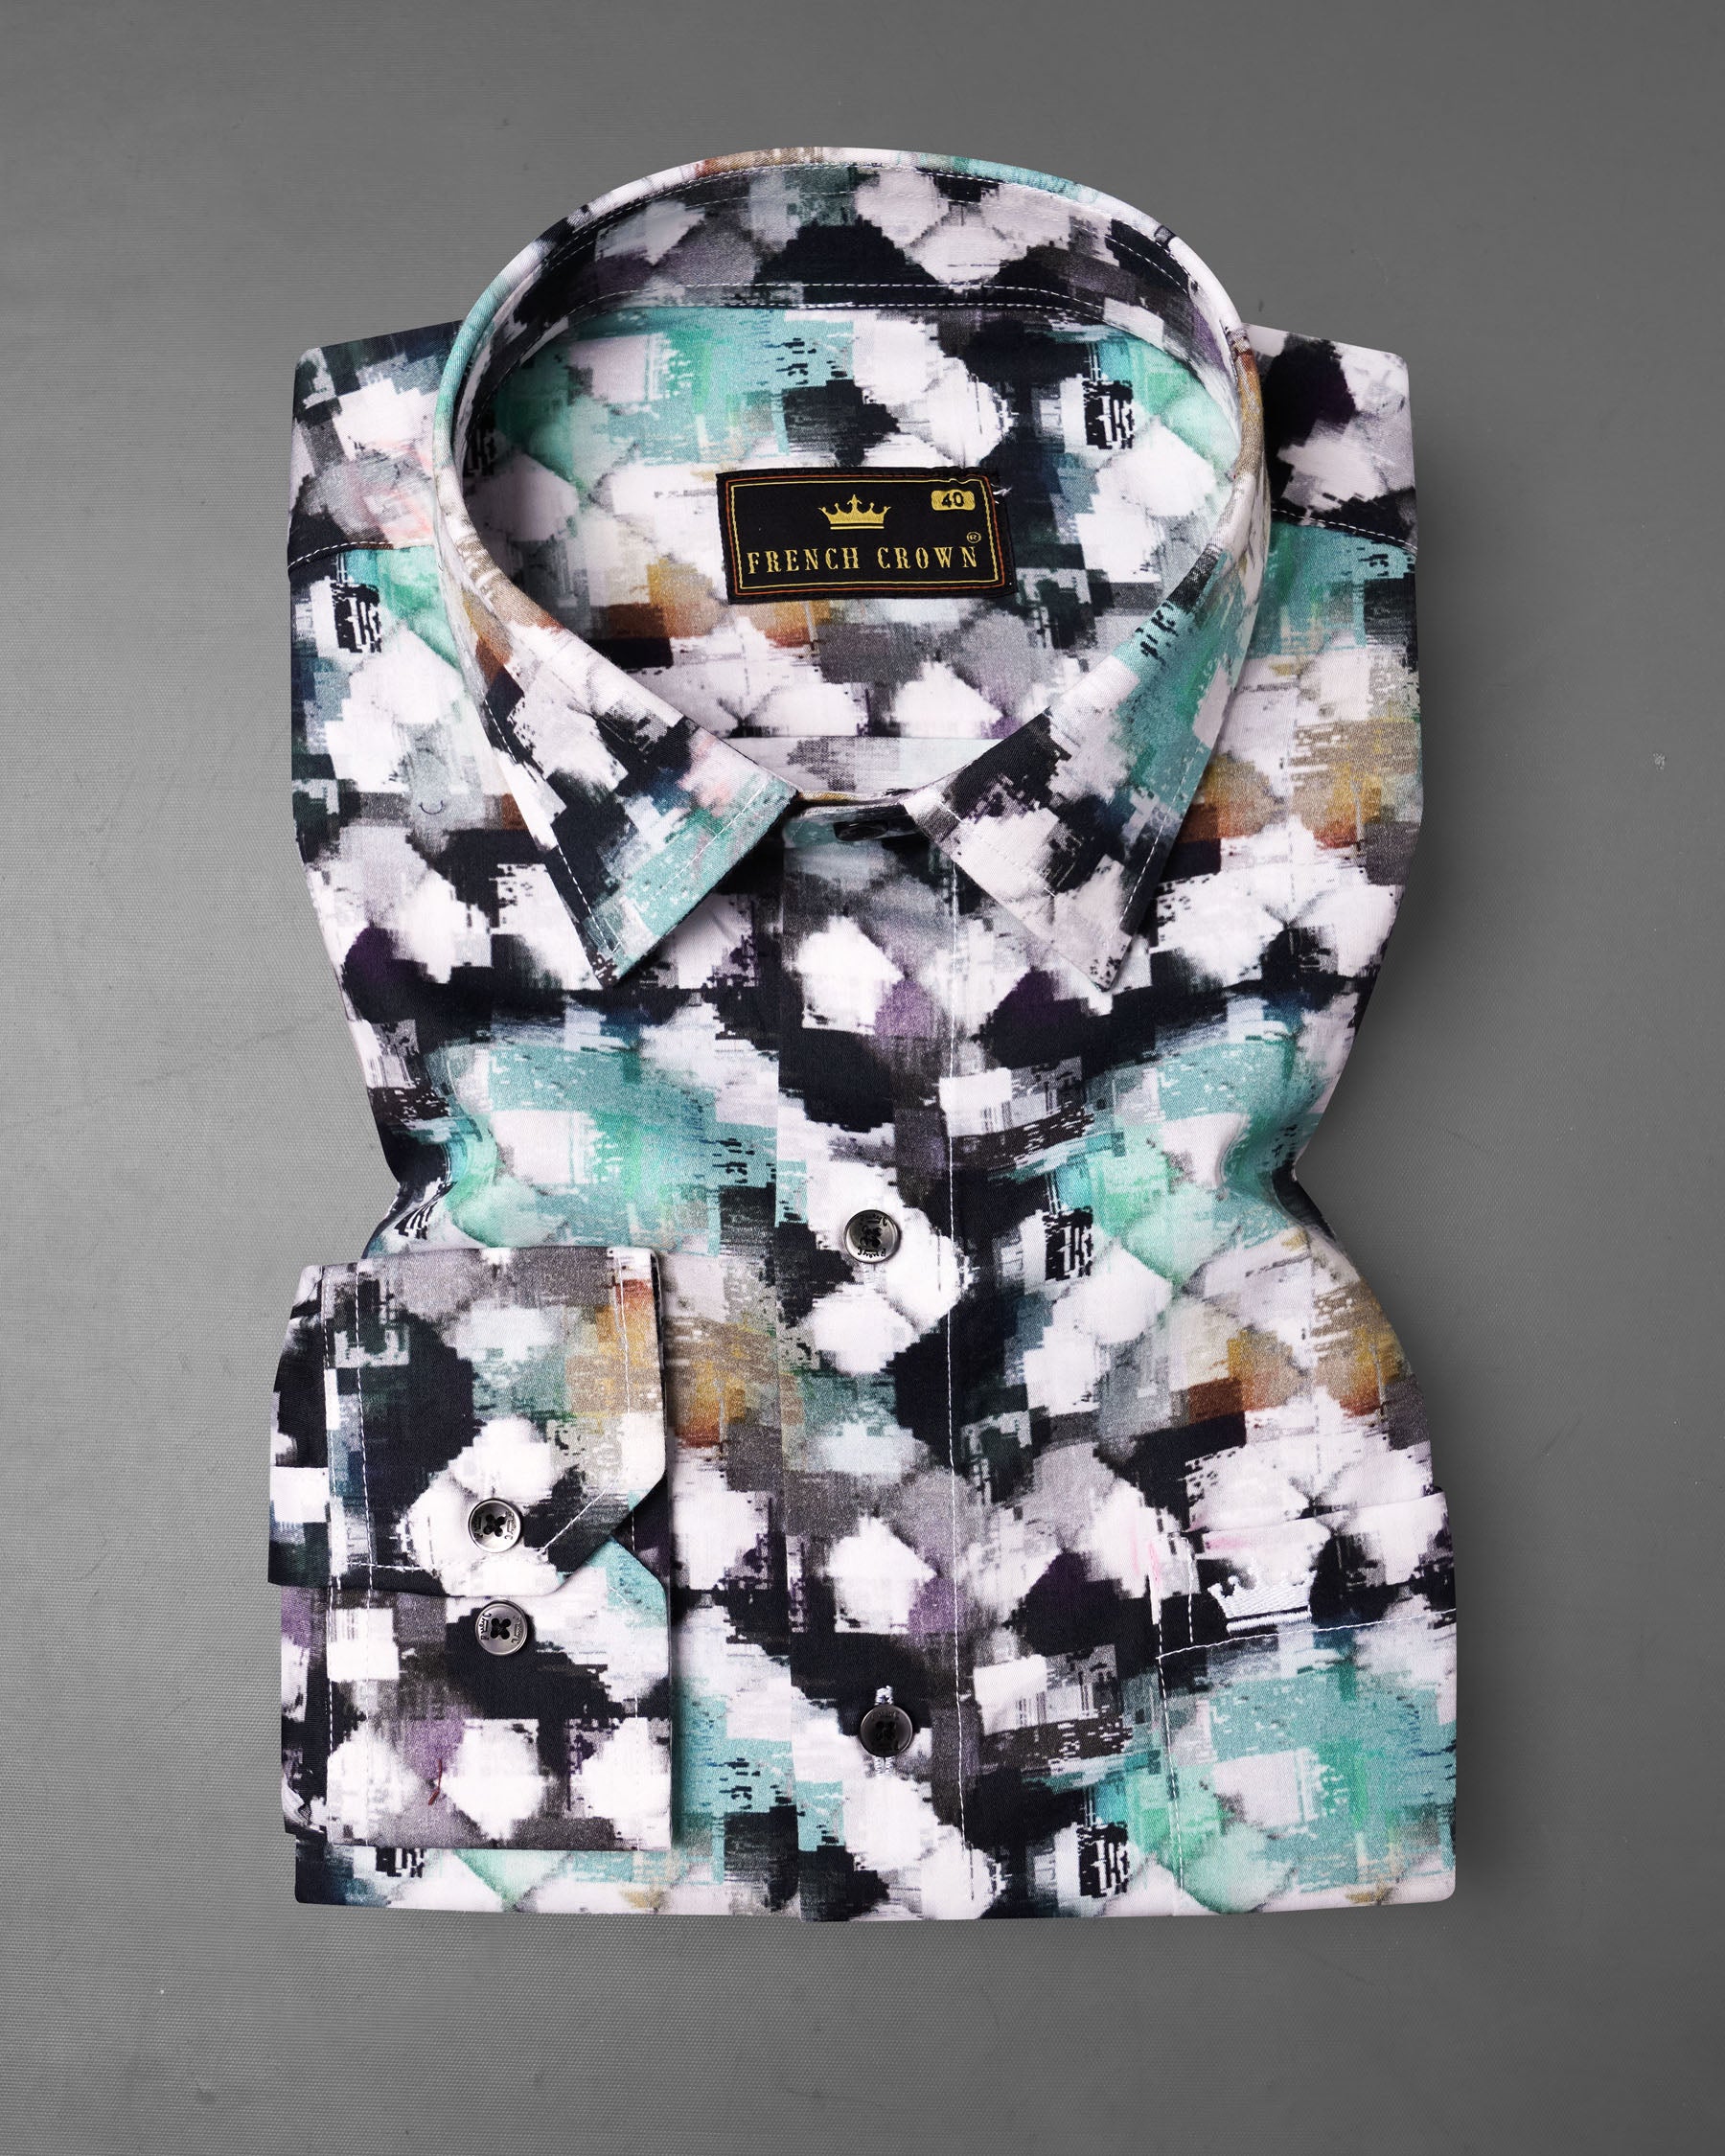 Bright White and Mulled Wine Marble Printed Super Soft Premium Cotton Shirt 7823-BLK-38,7823-BLK-38,7823-BLK-39,7823-BLK-39,7823-BLK-40,7823-BLK-40,7823-BLK-42,7823-BLK-42,7823-BLK-44,7823-BLK-44,7823-BLK-46,7823-BLK-46,7823-BLK-48,7823-BLK-48,7823-BLK-50,7823-BLK-50,7823-BLK-52,7823-BLK-52